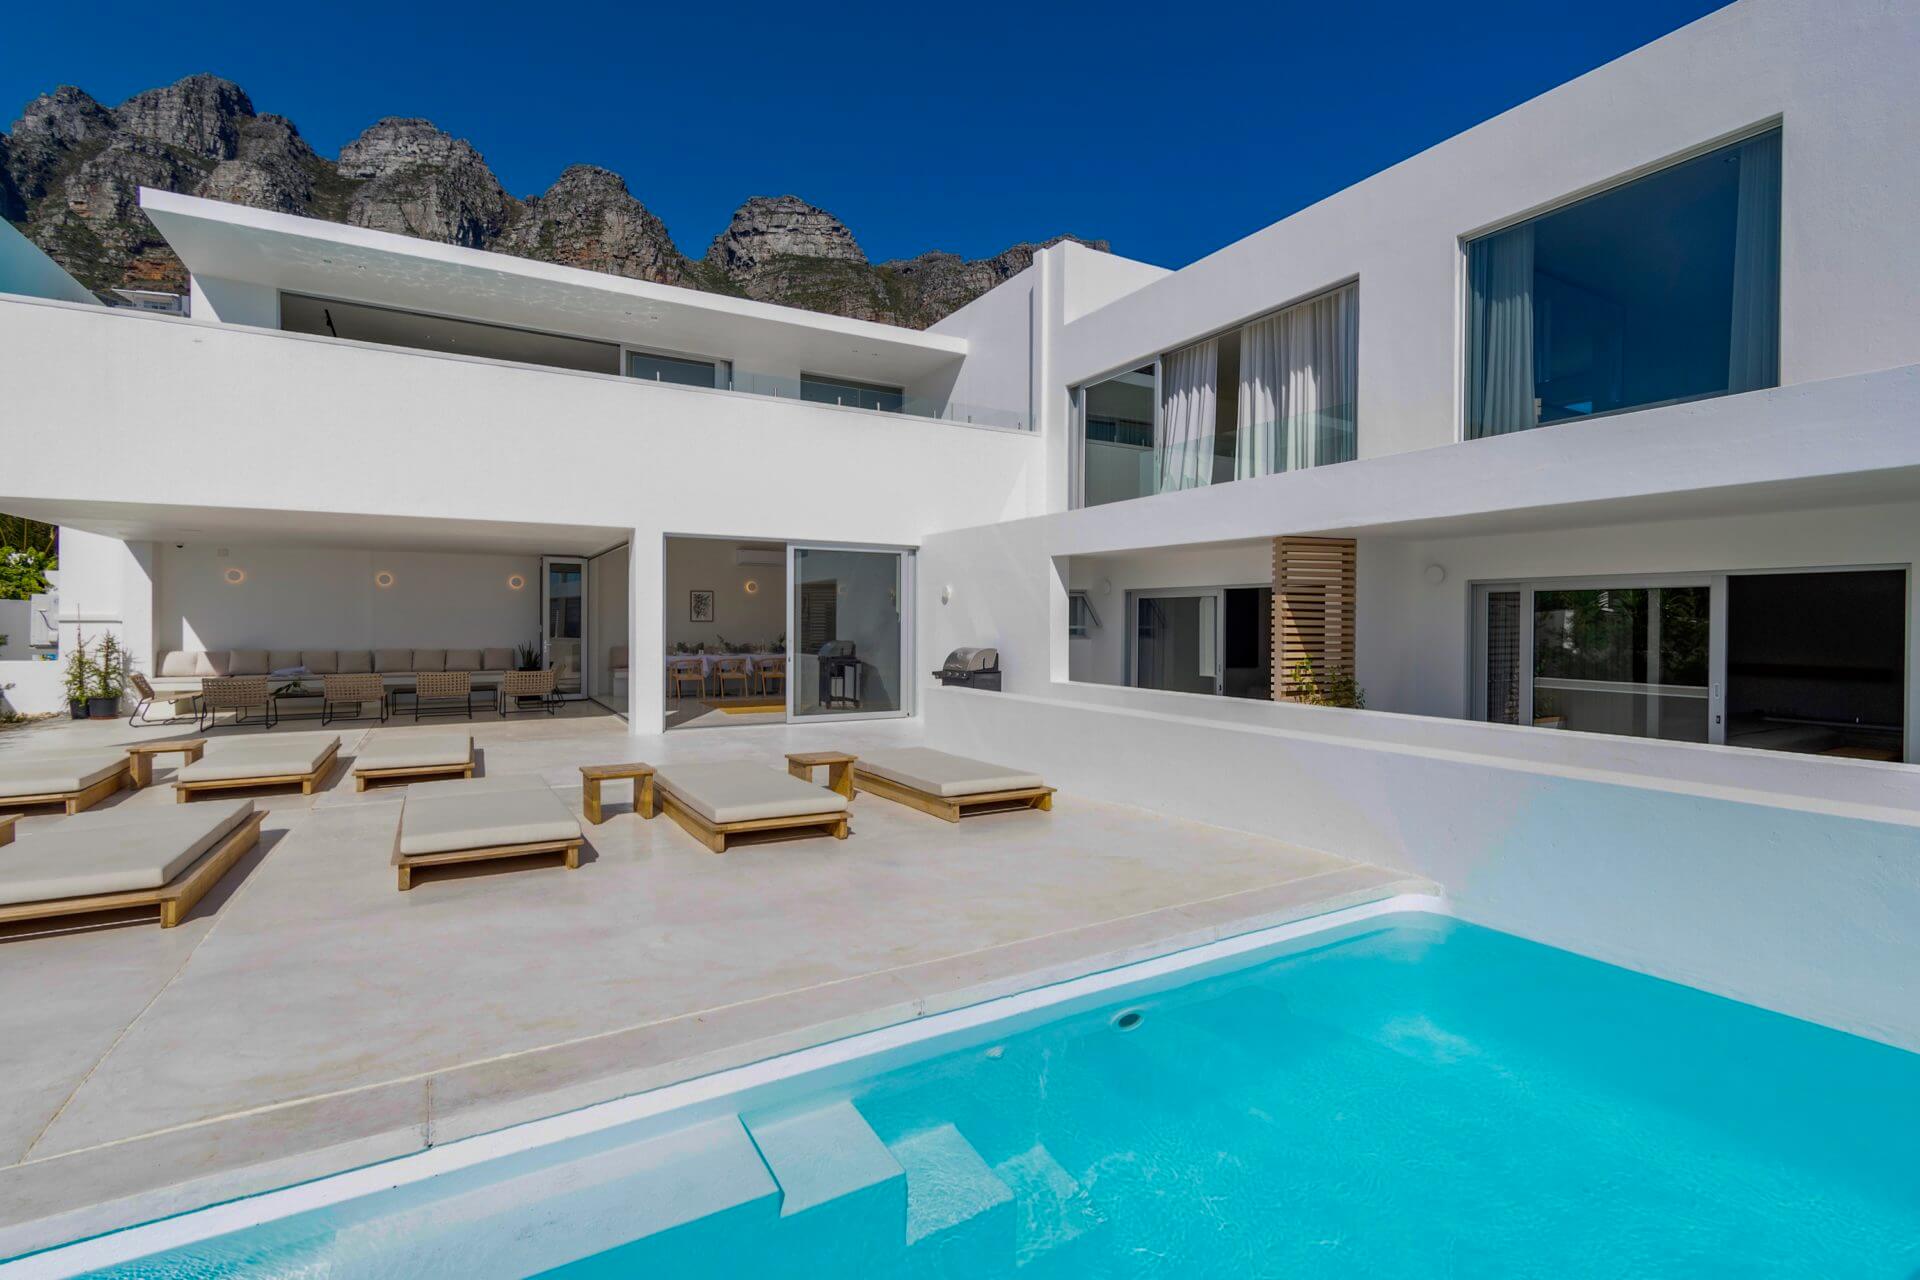 Photo 67 of Villa Ibiza accommodation in Camps Bay, Cape Town with 8 bedrooms and 8 bathrooms